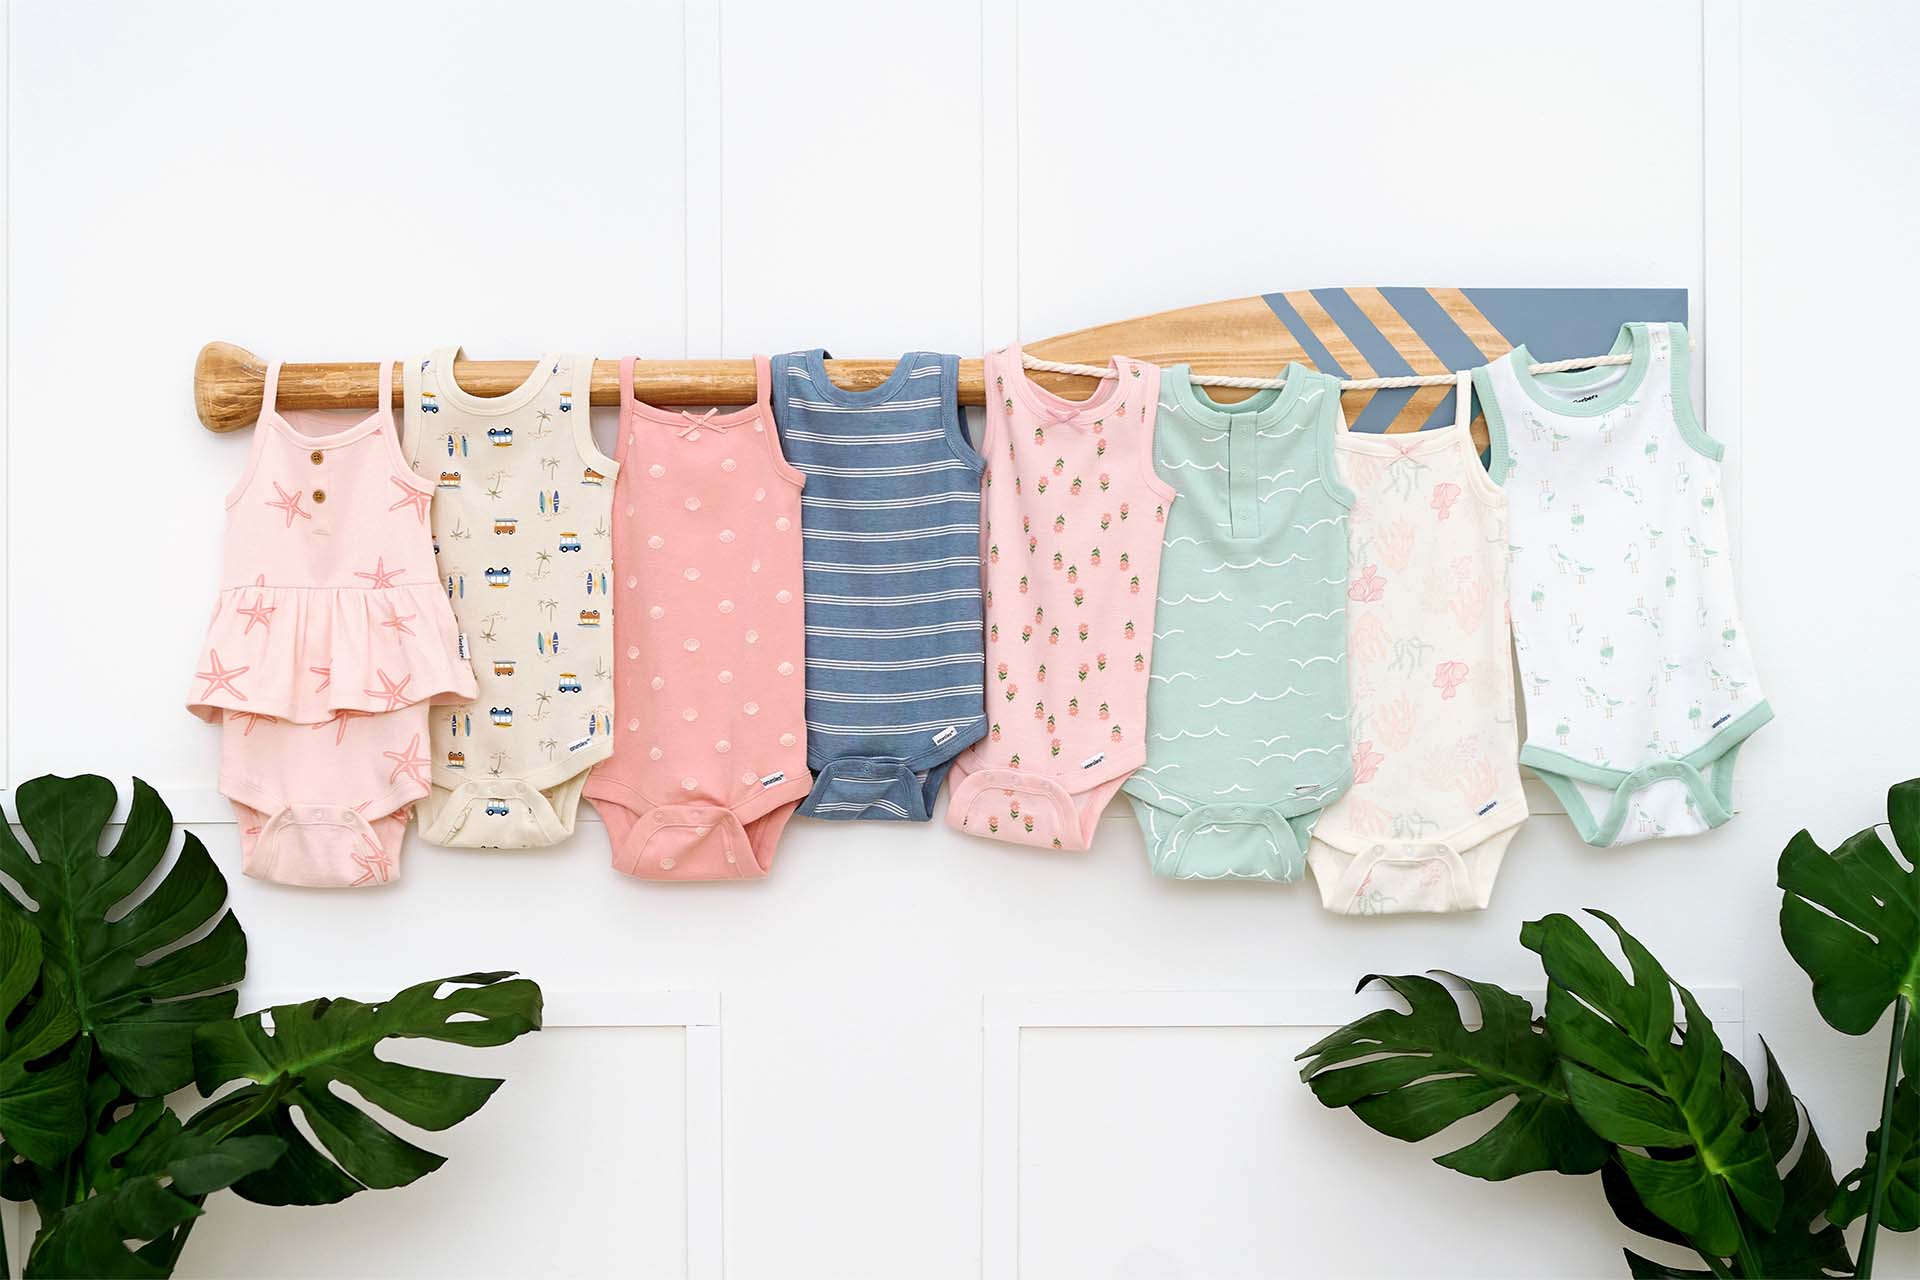 A row of baby onesies in various colors and patterns, including pink, white, blue, and green, hangs on a wooden rod. Two large green leaves can be seen in the bottom corners of the image.